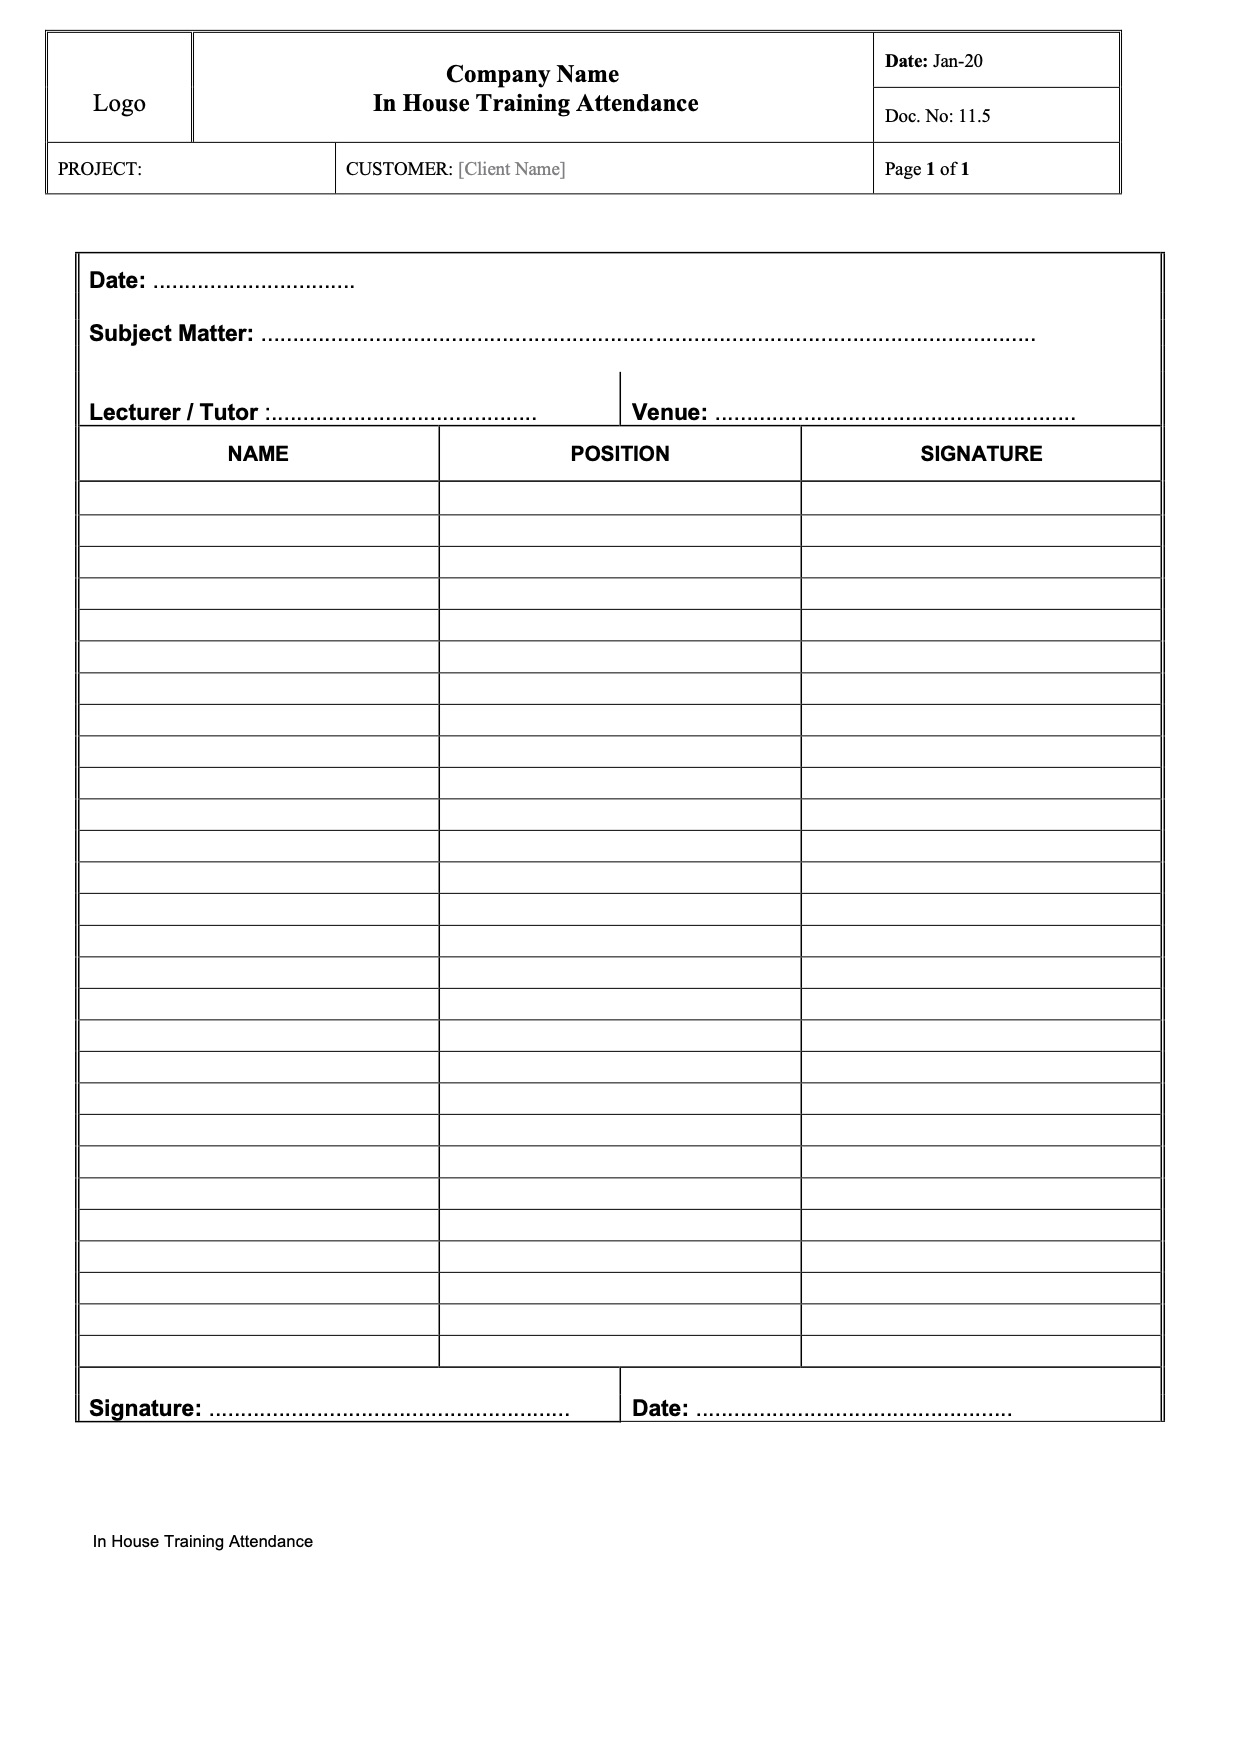 CT050 -In-House Training Attendance Sheet